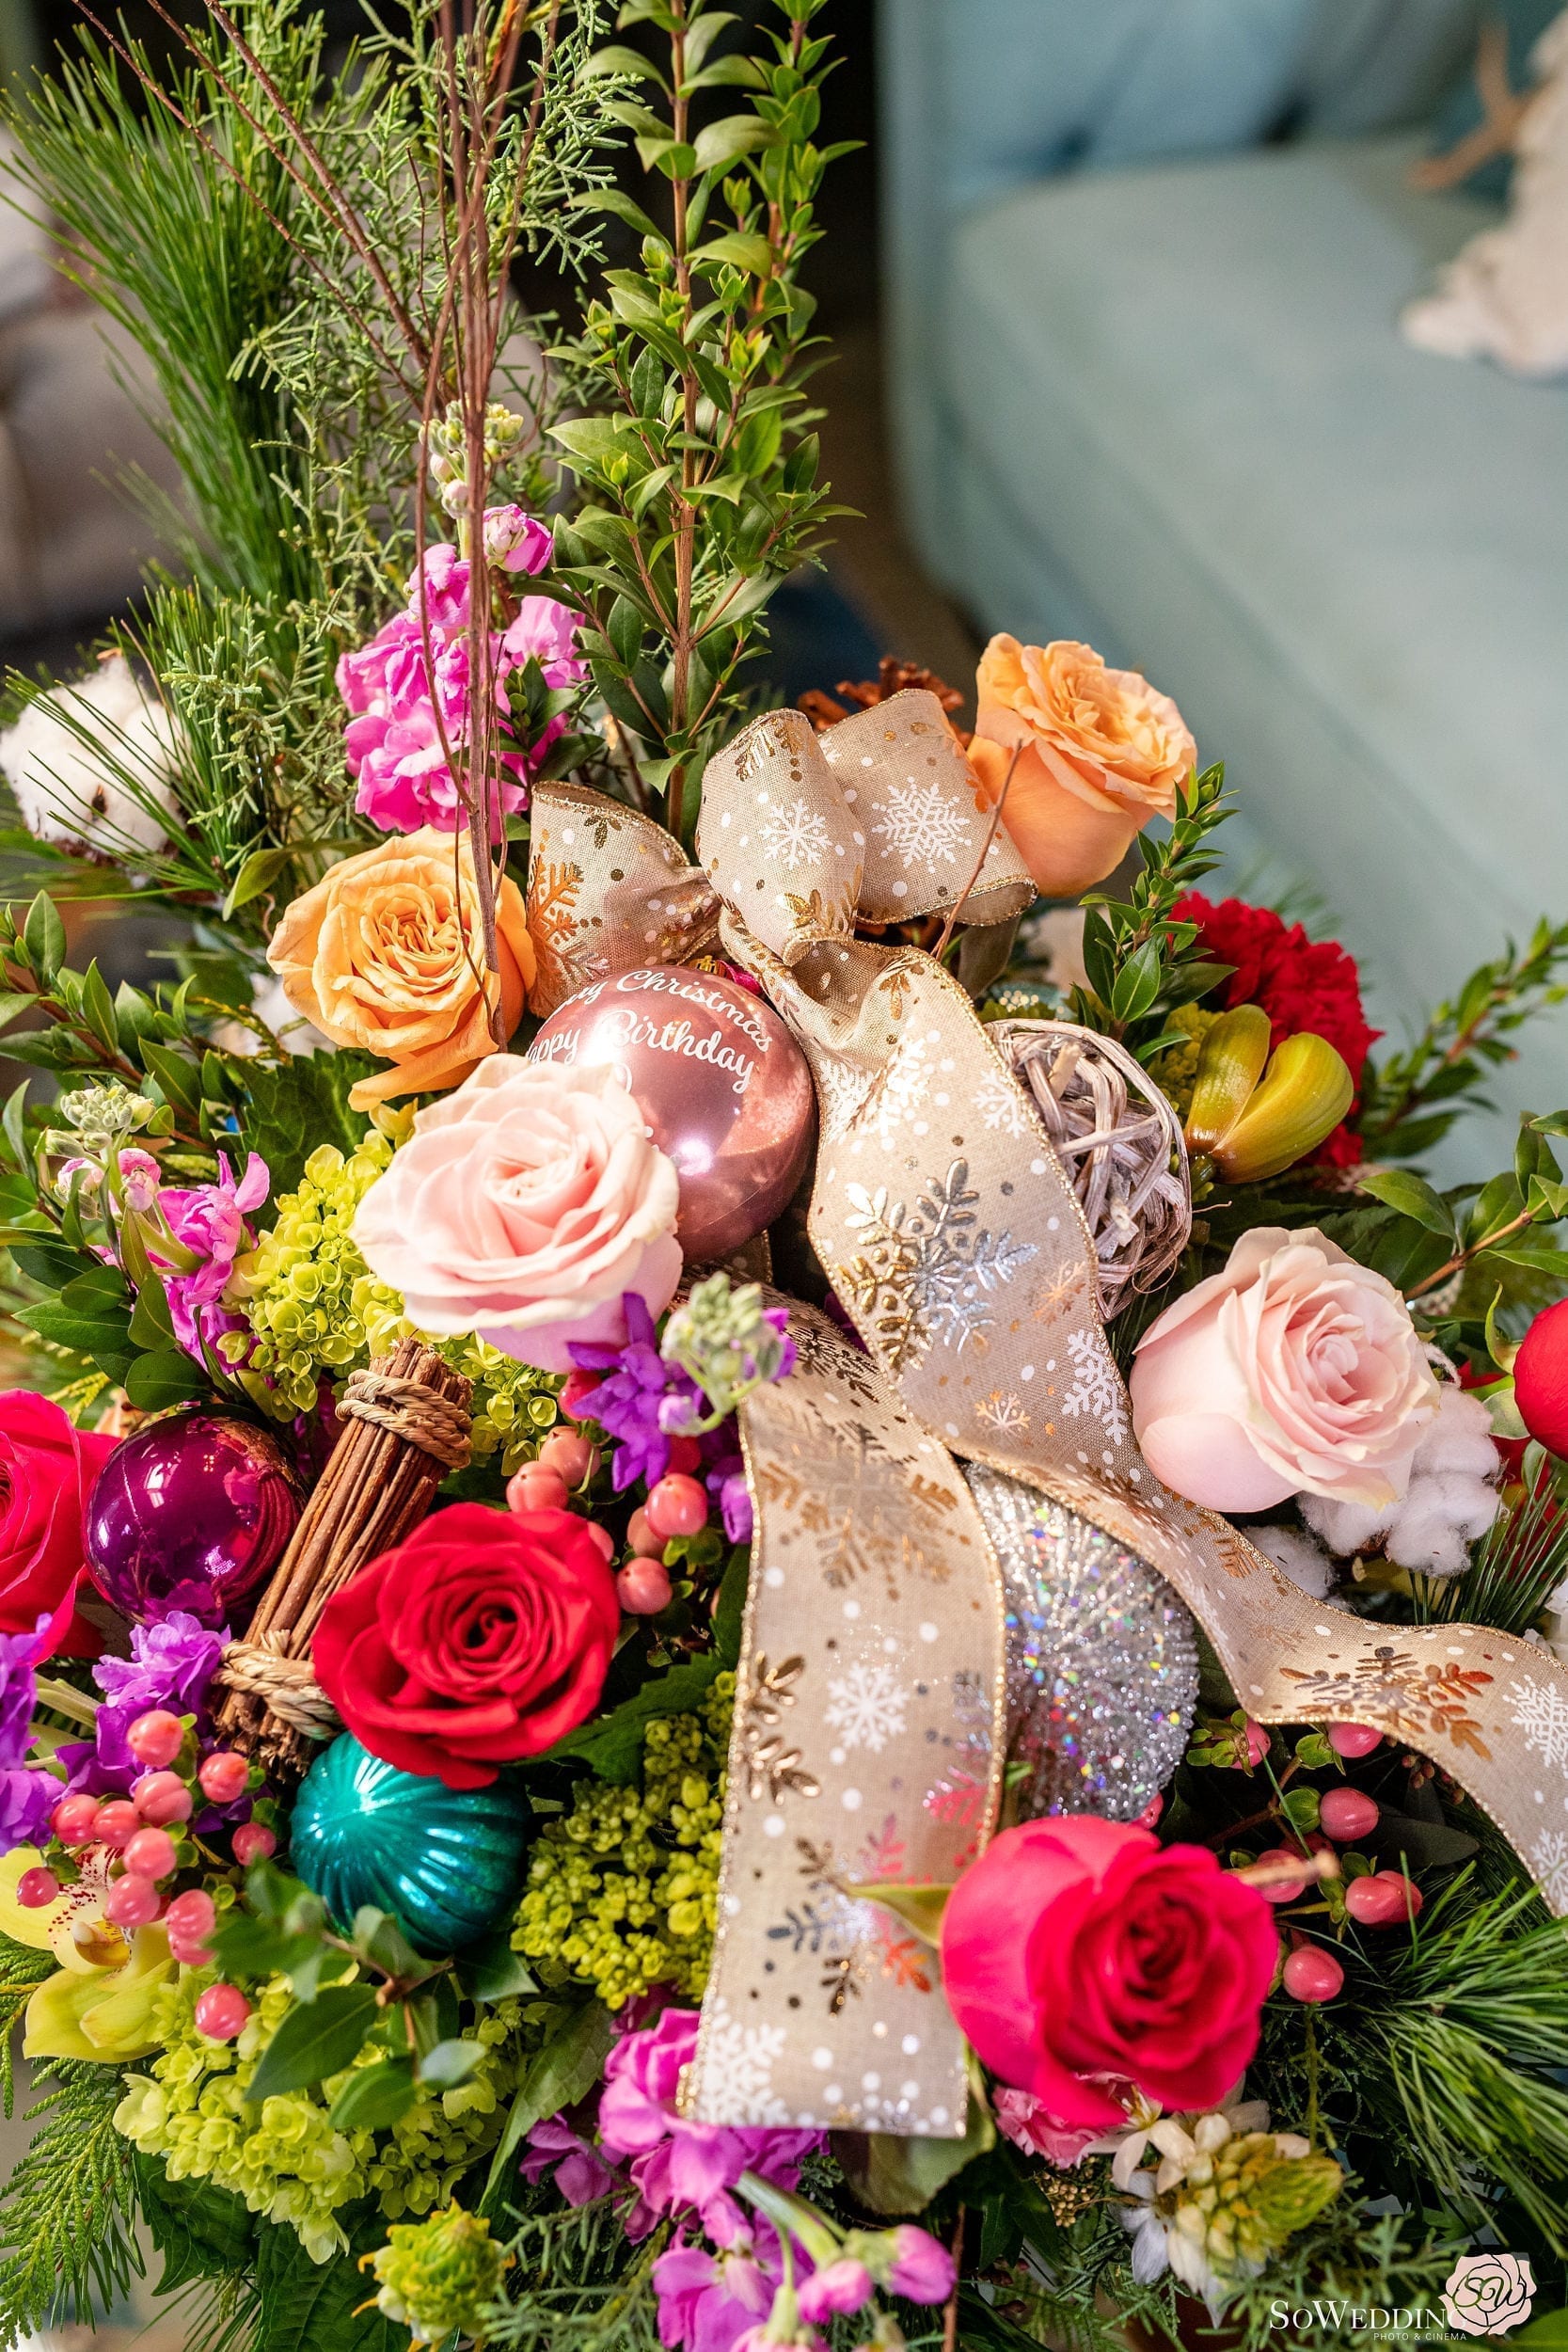 2020 Colourful ROA Holiday Themed Boxes: Fresh Floral Blooms and Greeneries